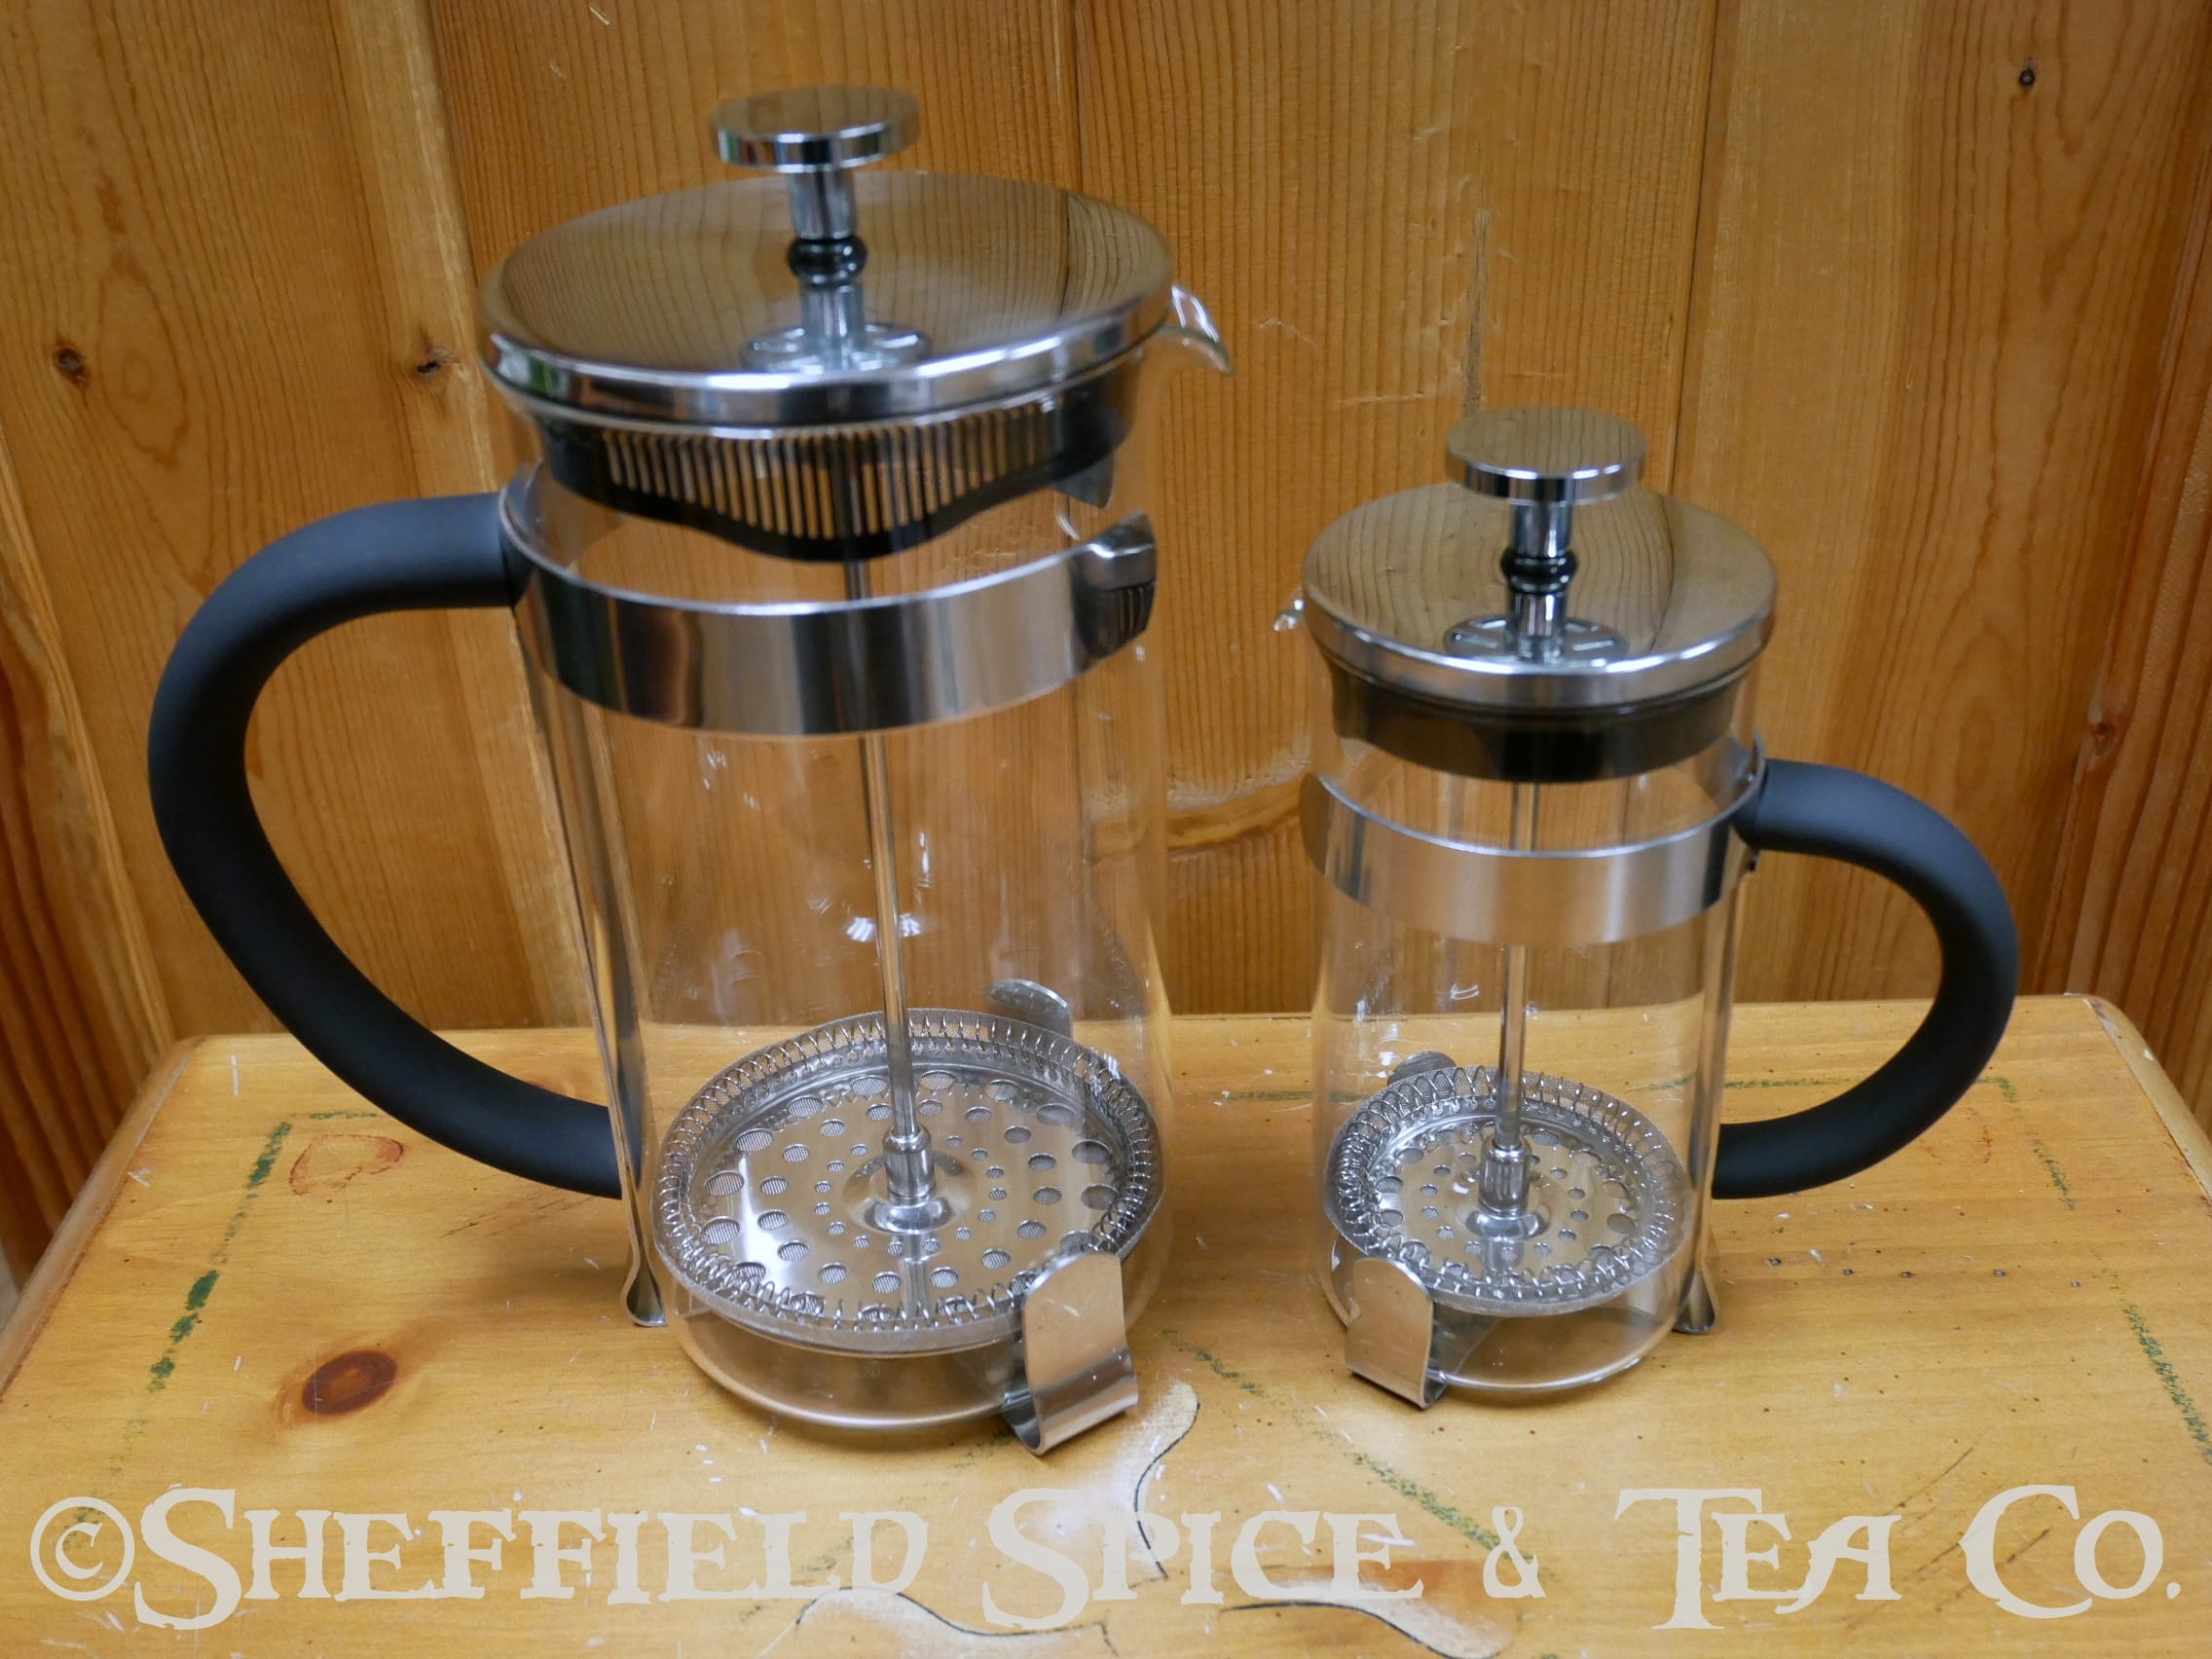 https://epjr3q9r9ms.exactdn.com/wp-content/uploads/2022/08/fino-french-press-stainless-steel-set-image.jpg?strip=all&lossy=1&ssl=1